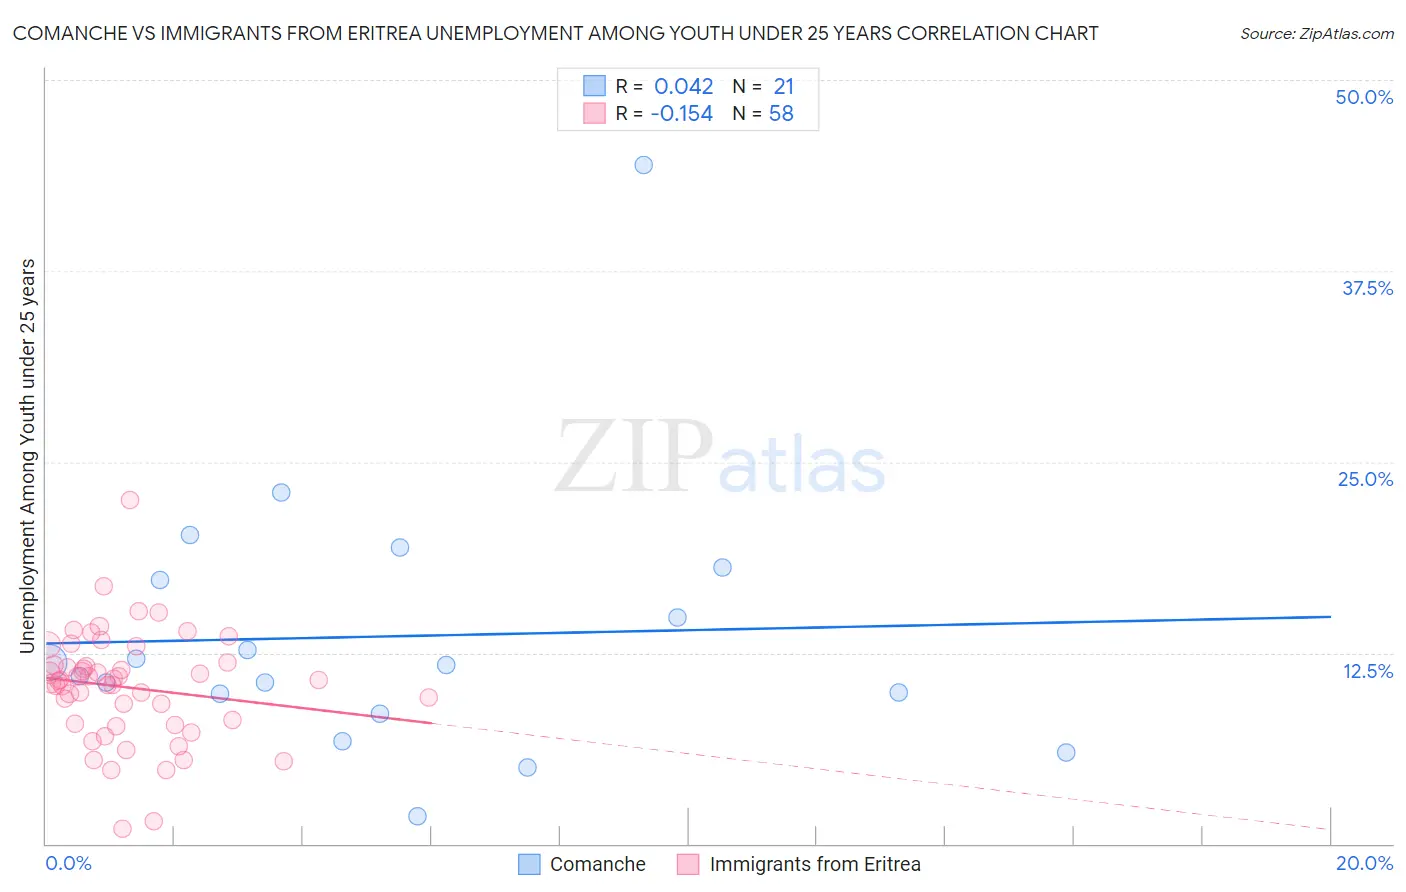 Comanche vs Immigrants from Eritrea Unemployment Among Youth under 25 years